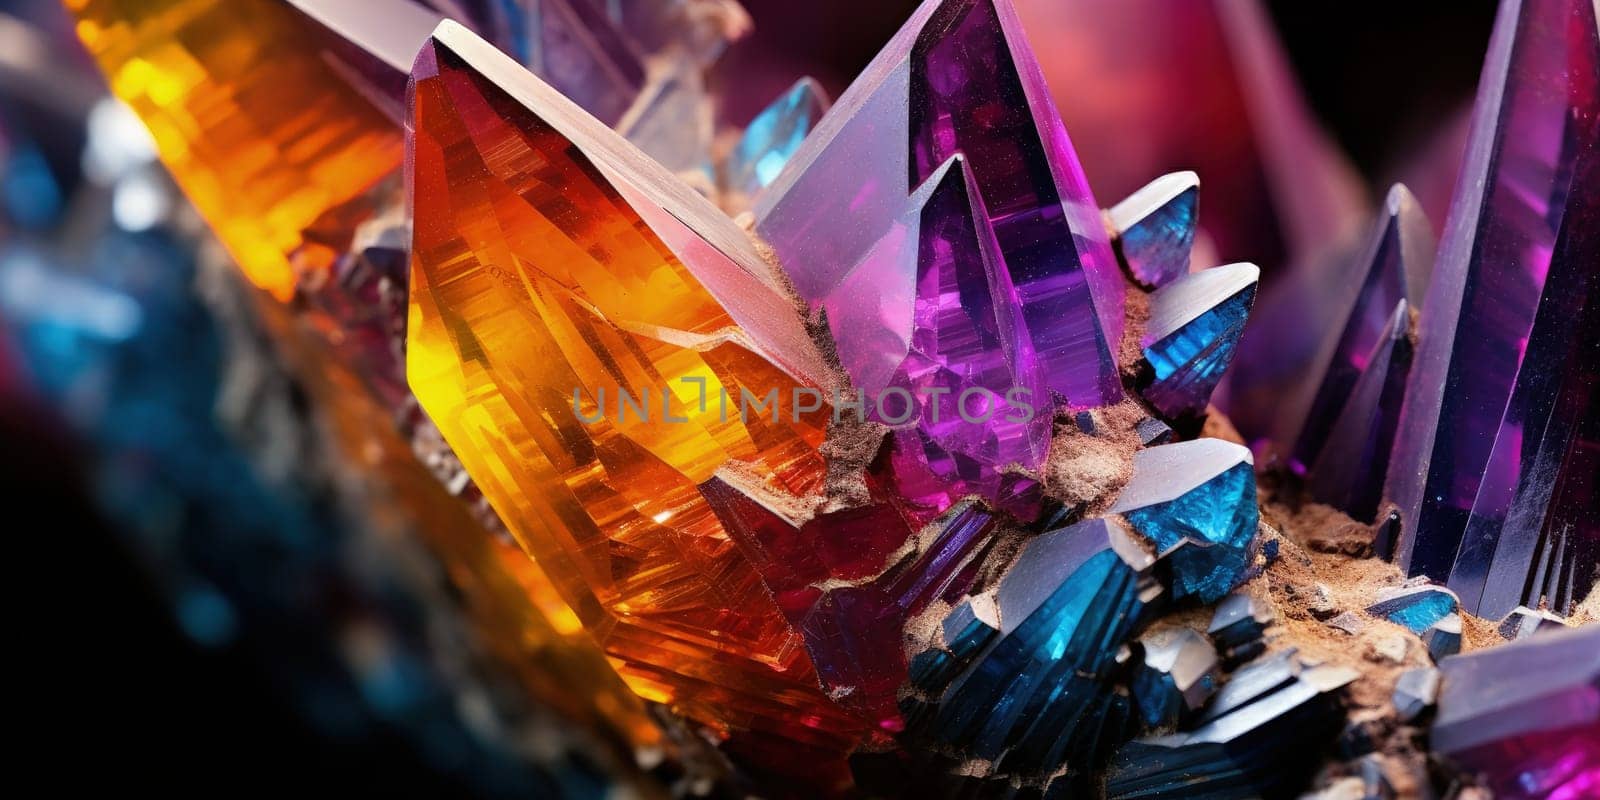 A macro photograph capturing the mesmerizing details of crystals, the intricate facets and vibrant colors of each crystal formation by Kadula